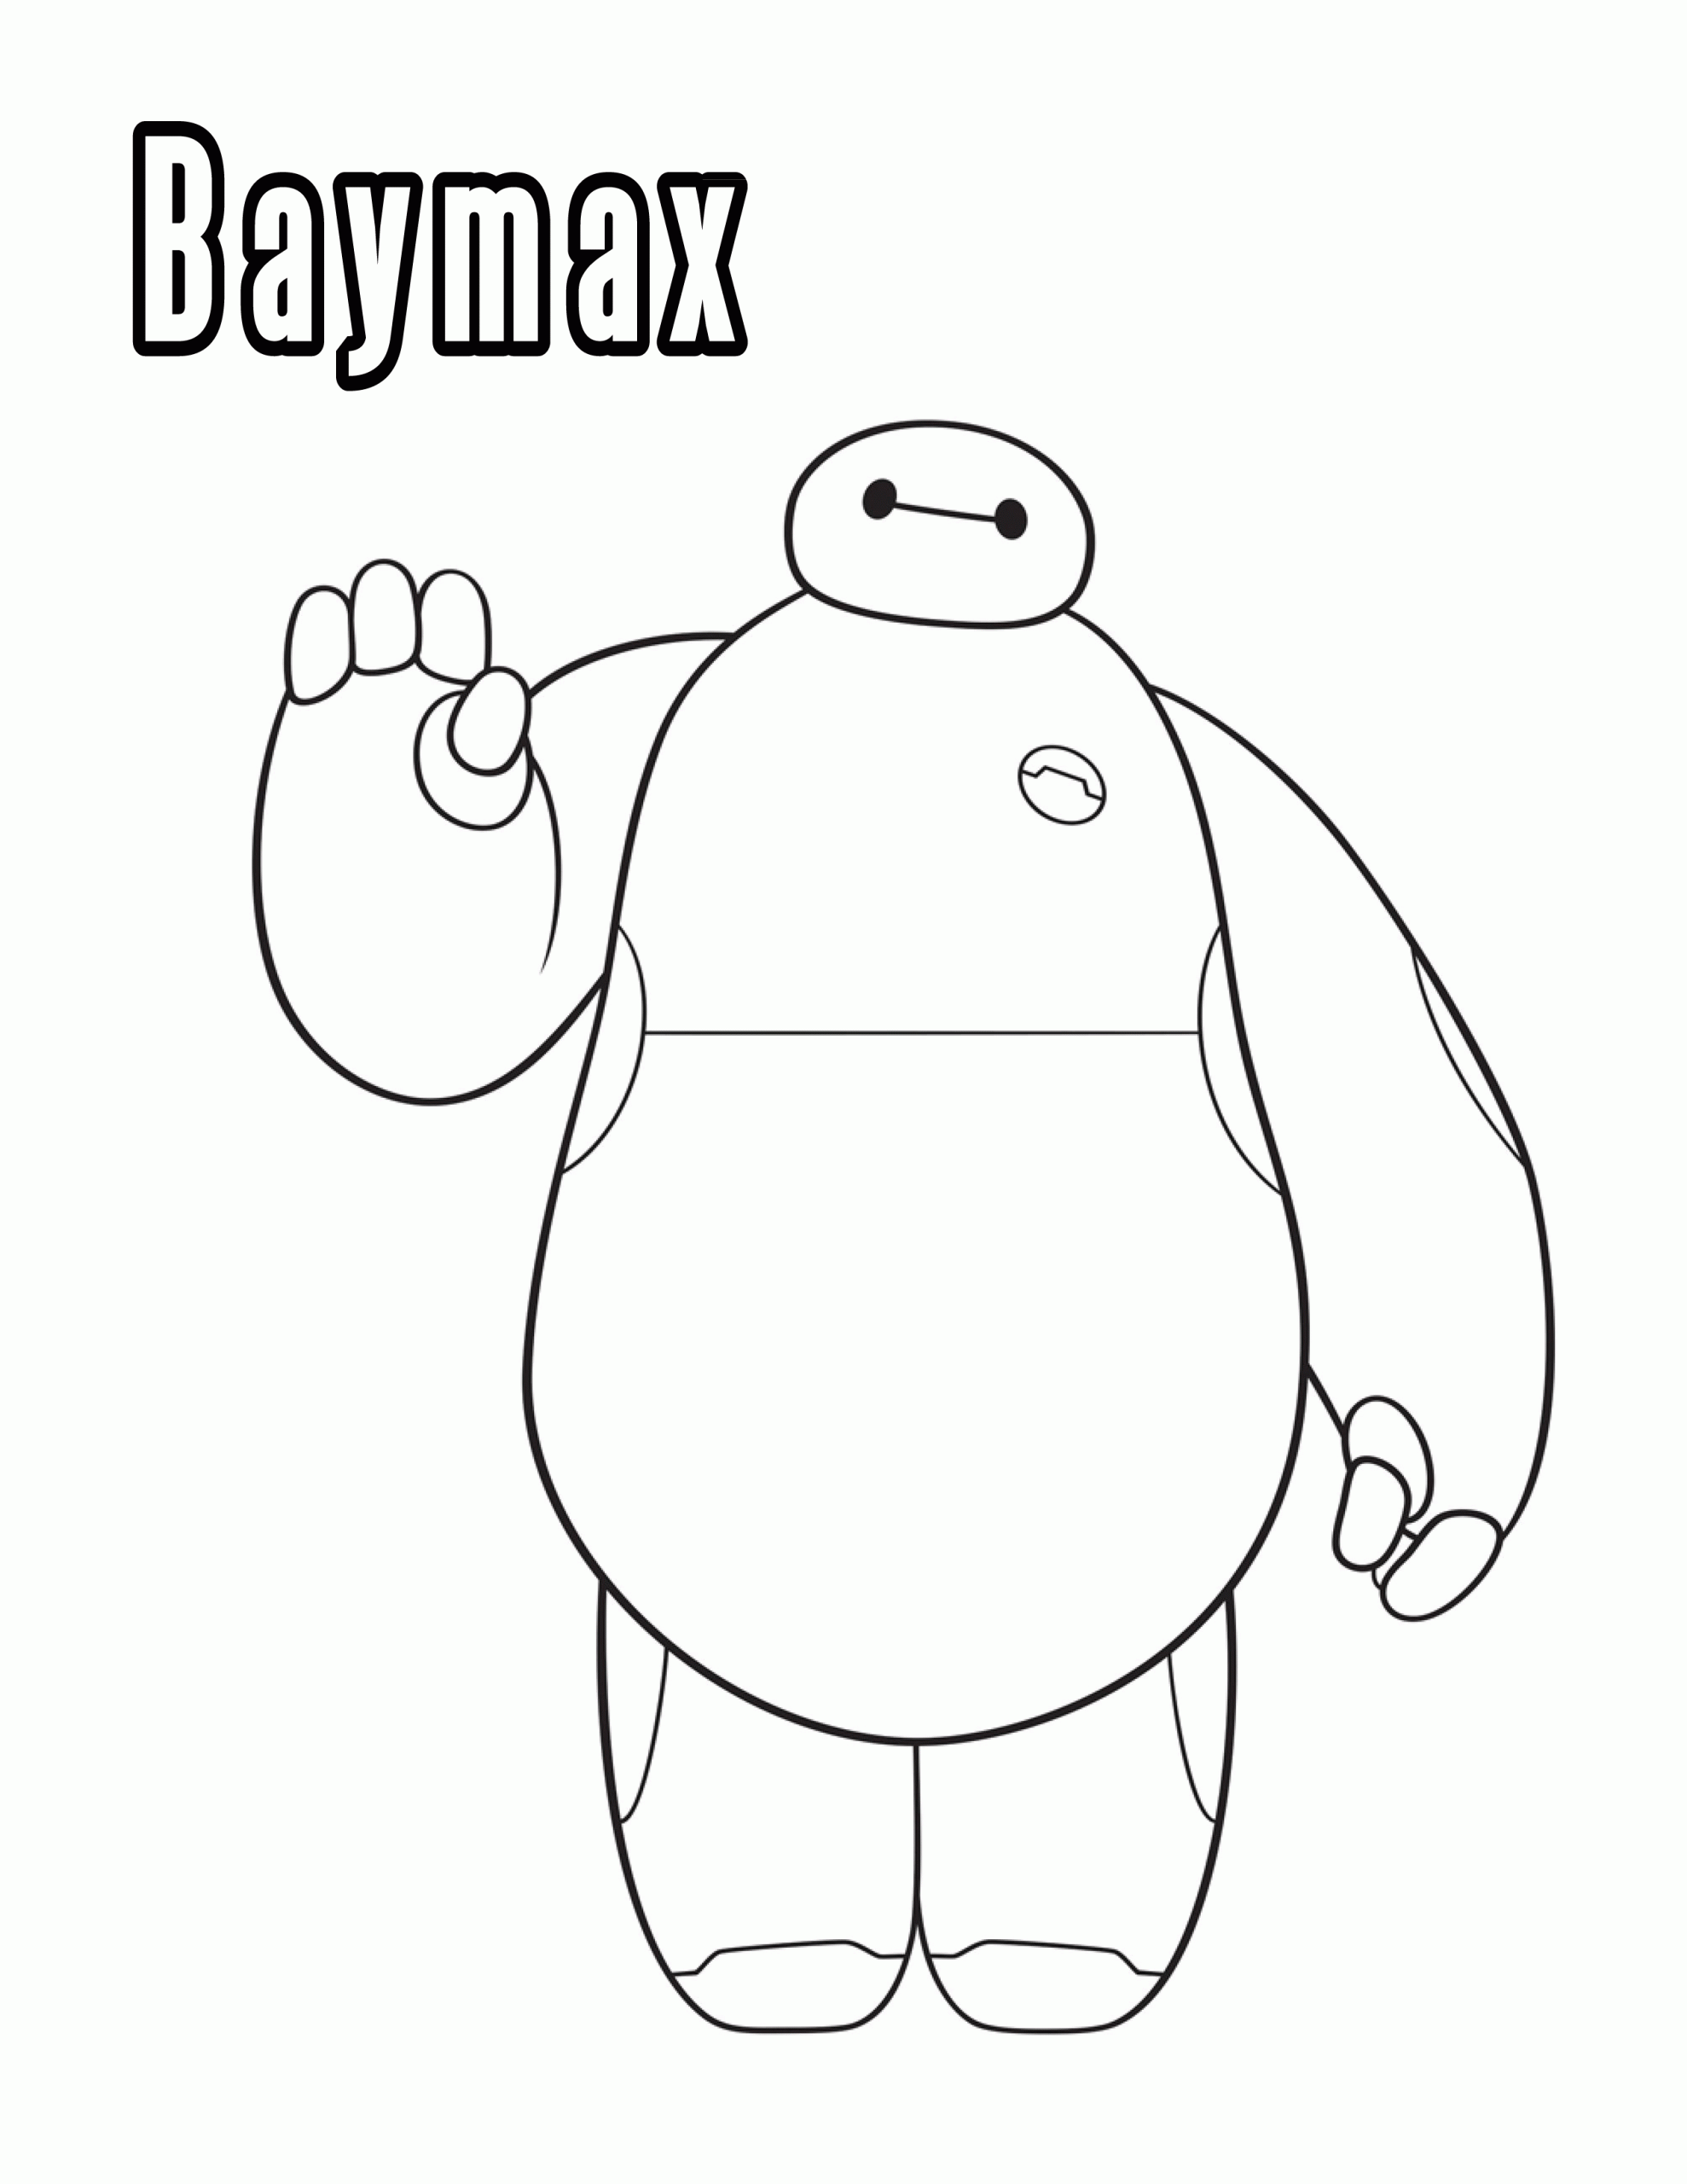 Baymax Only Coloring Page